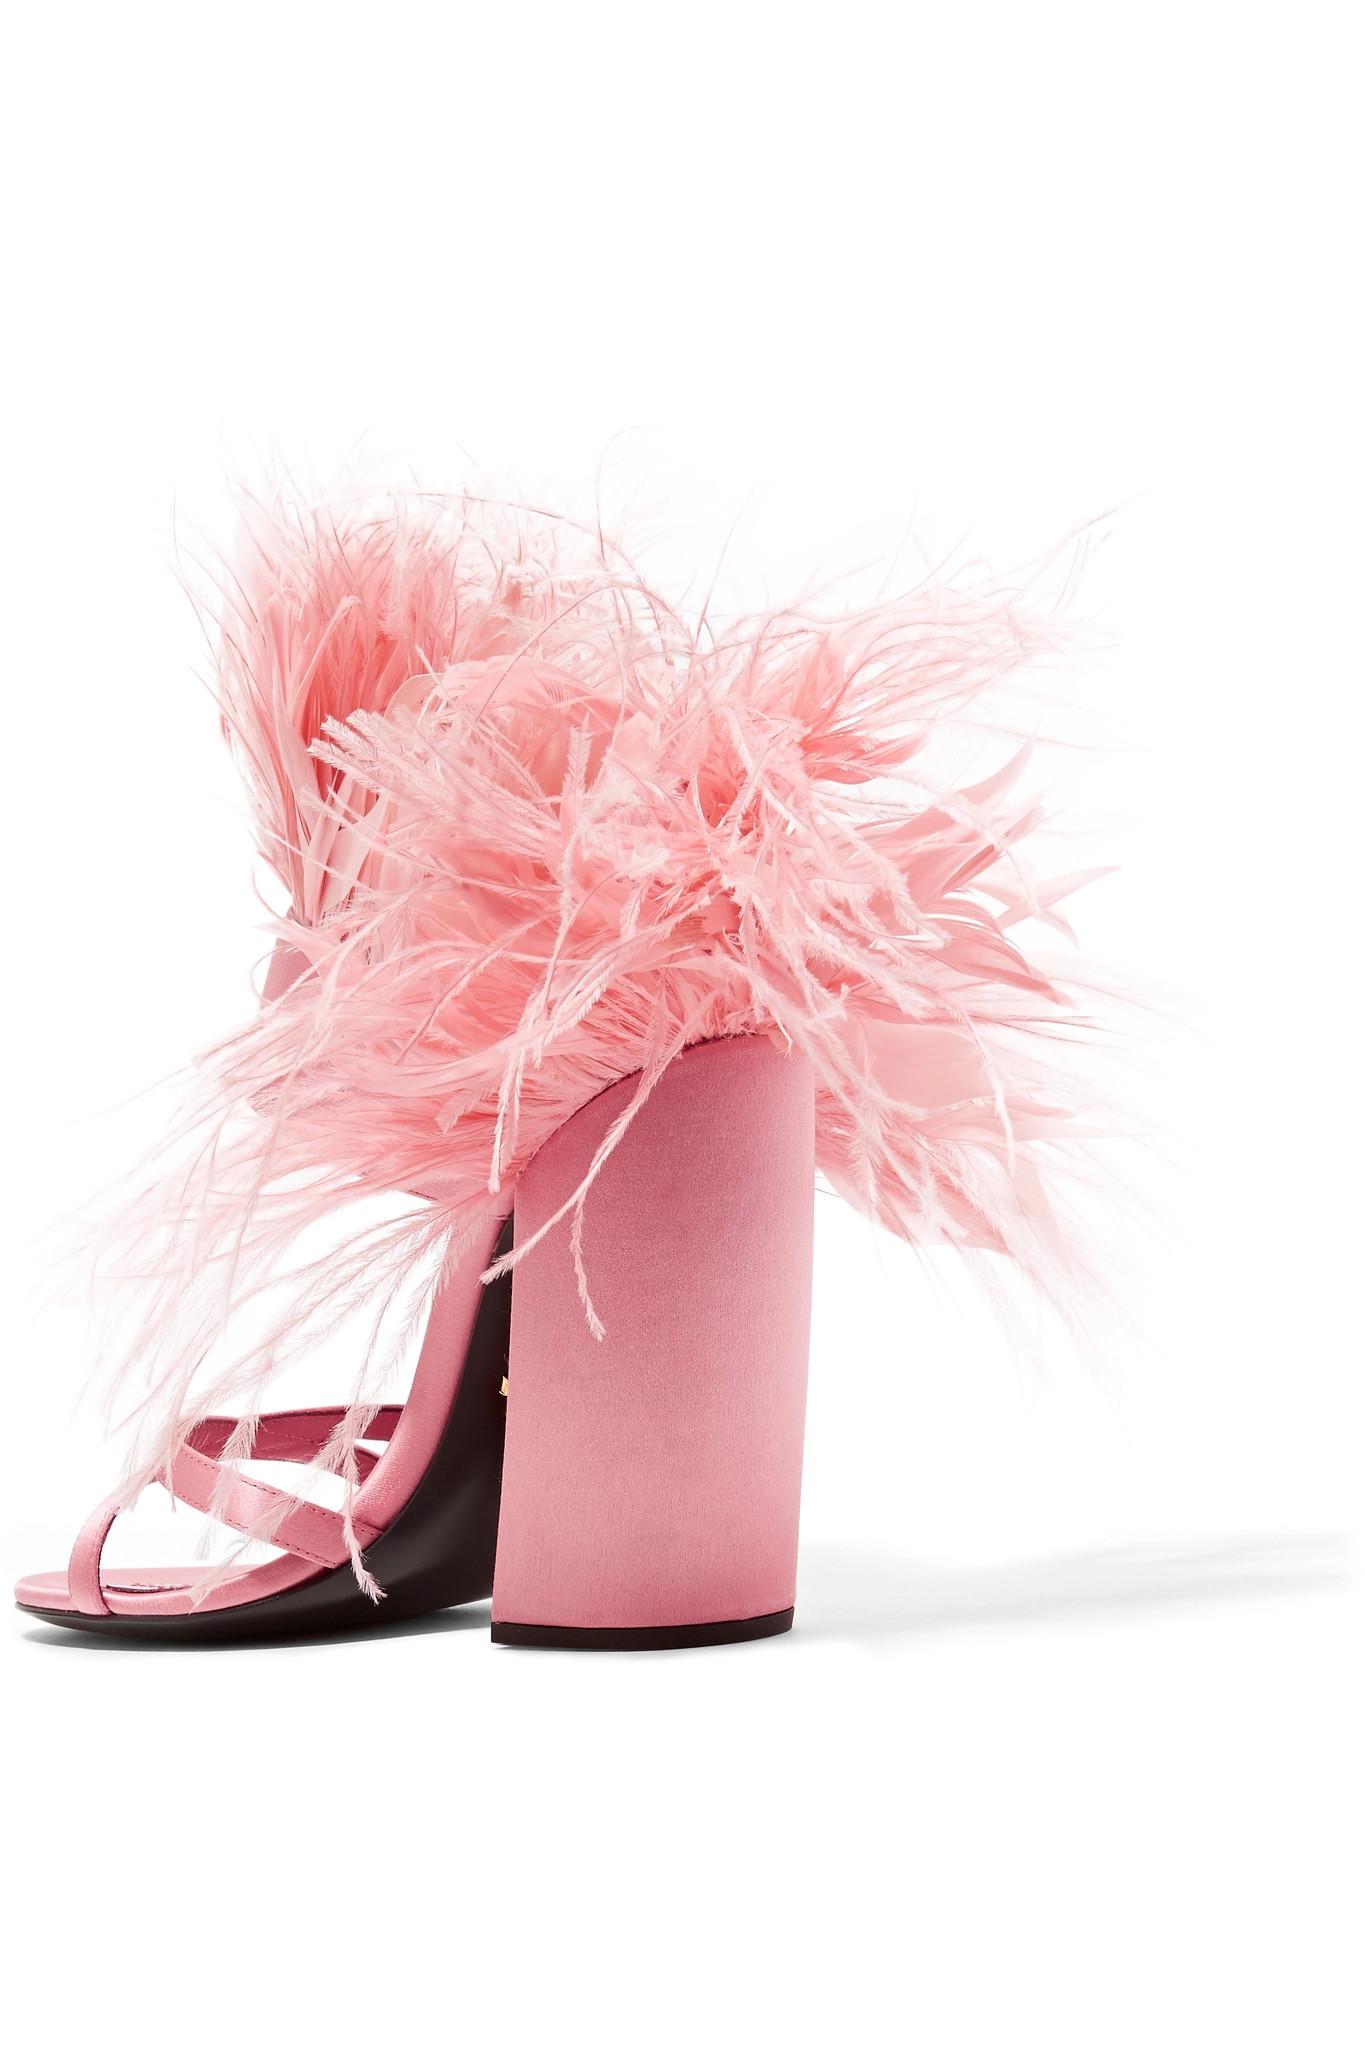 Prada Feather-trimmed Satin Sandals in Baby Pink (Pink) - Lyst